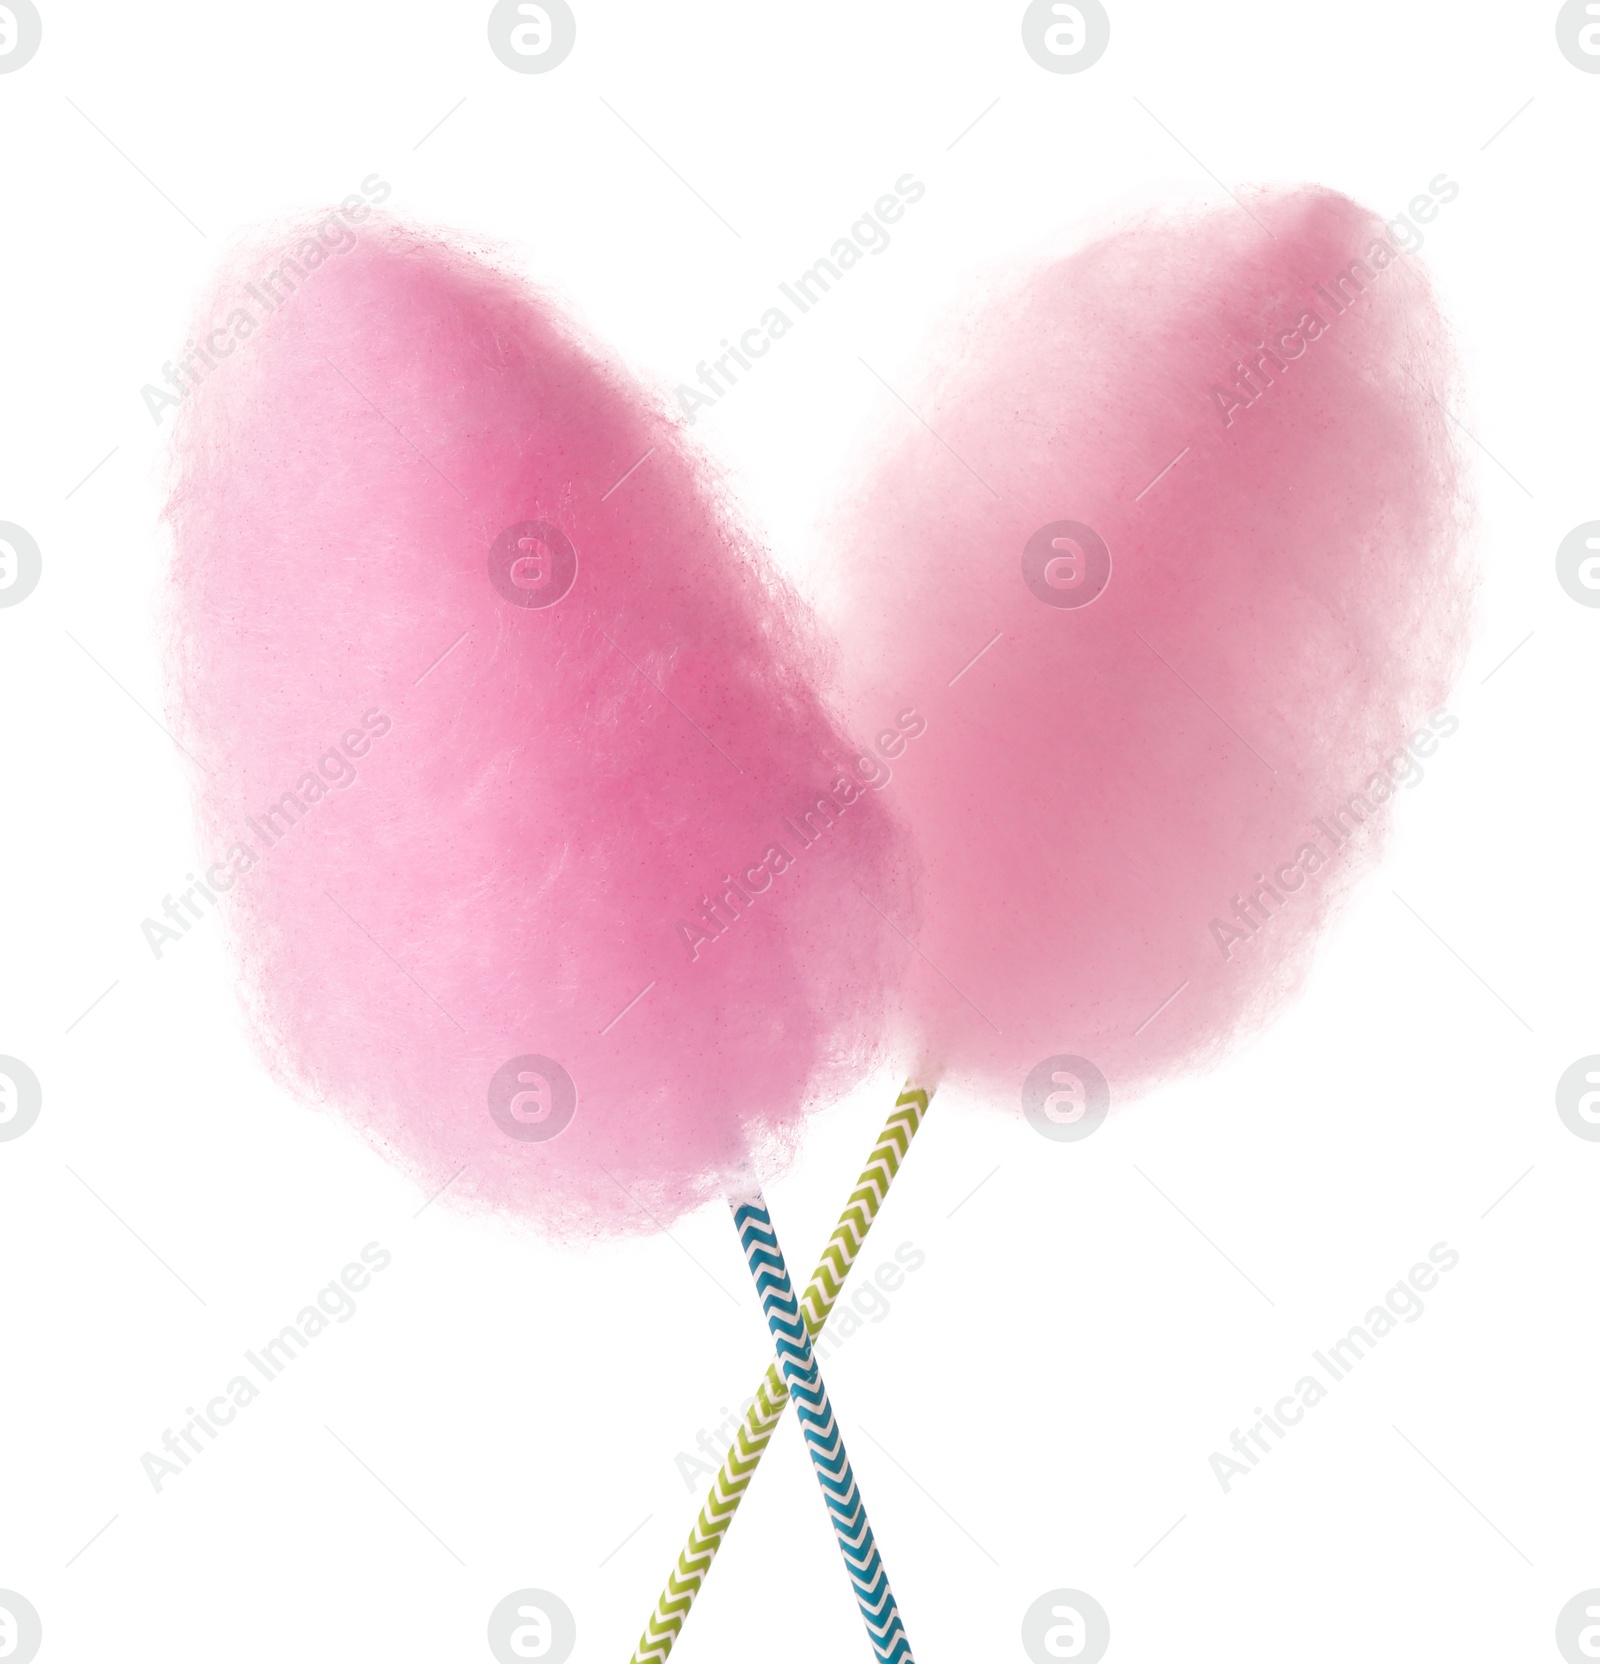 Photo of Two sweet pink cotton candies isolated on white